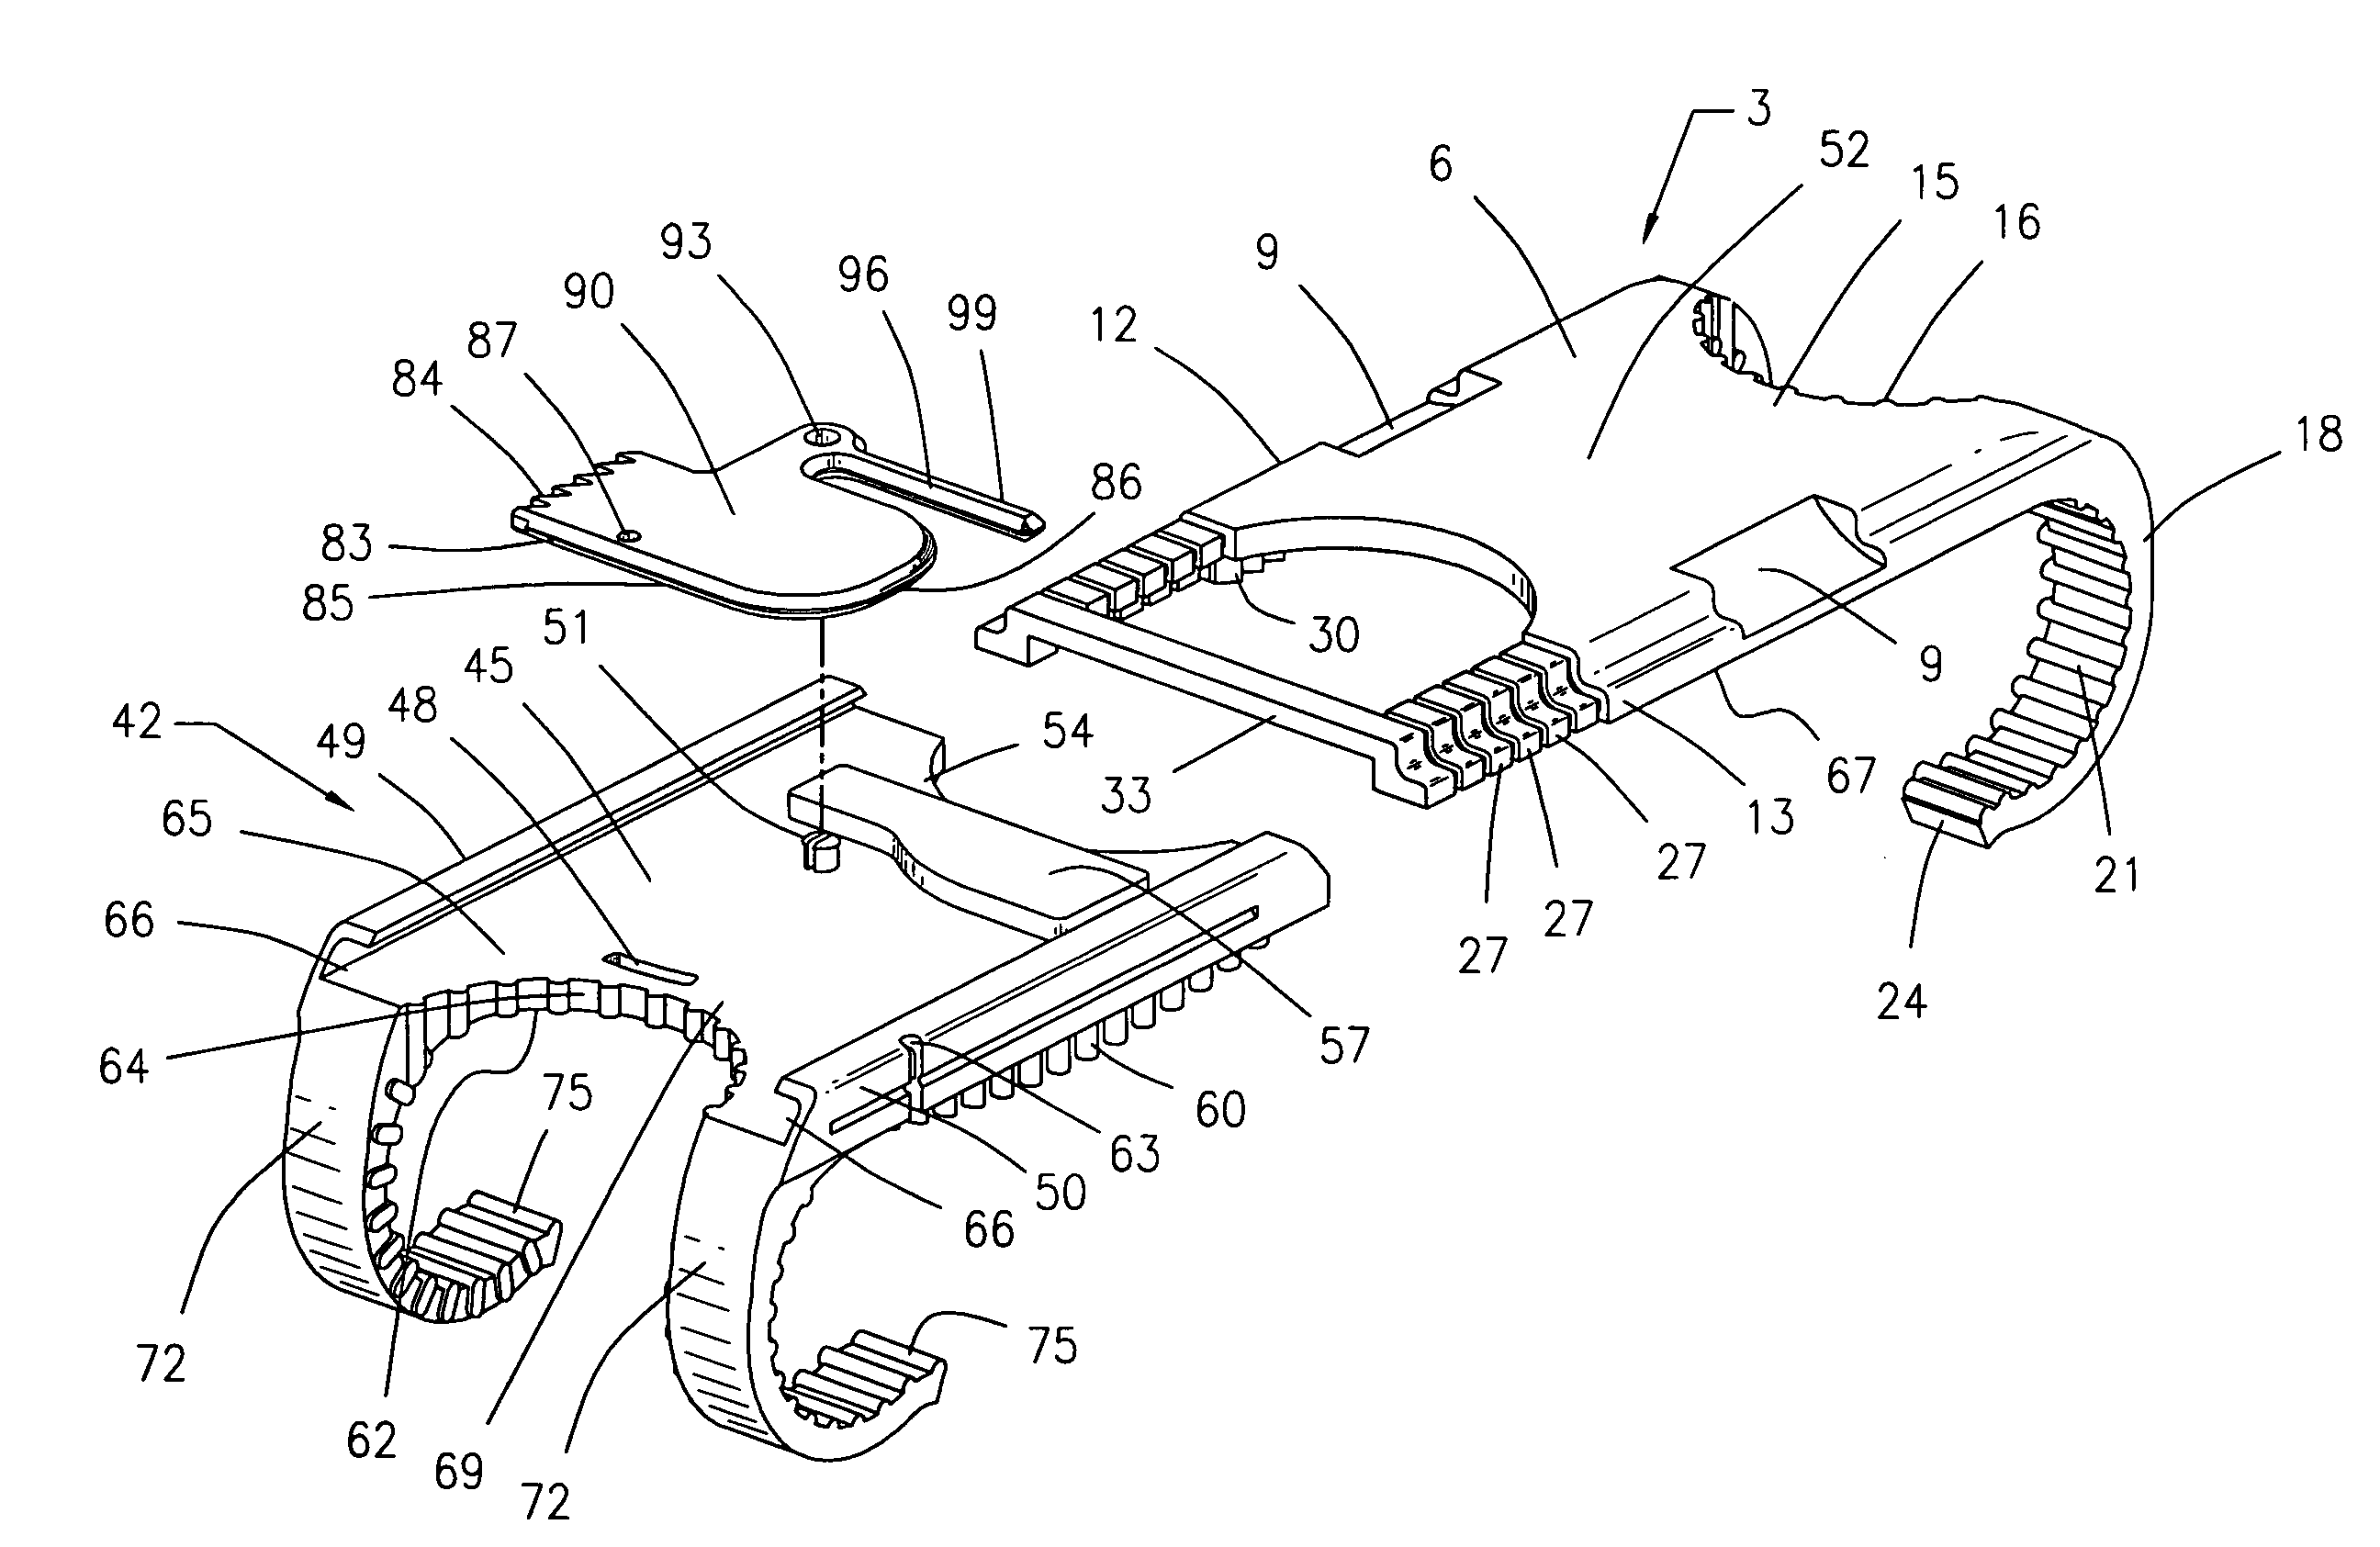 Surgical device for capturing, positioning and aligning portions of a severed human sternum